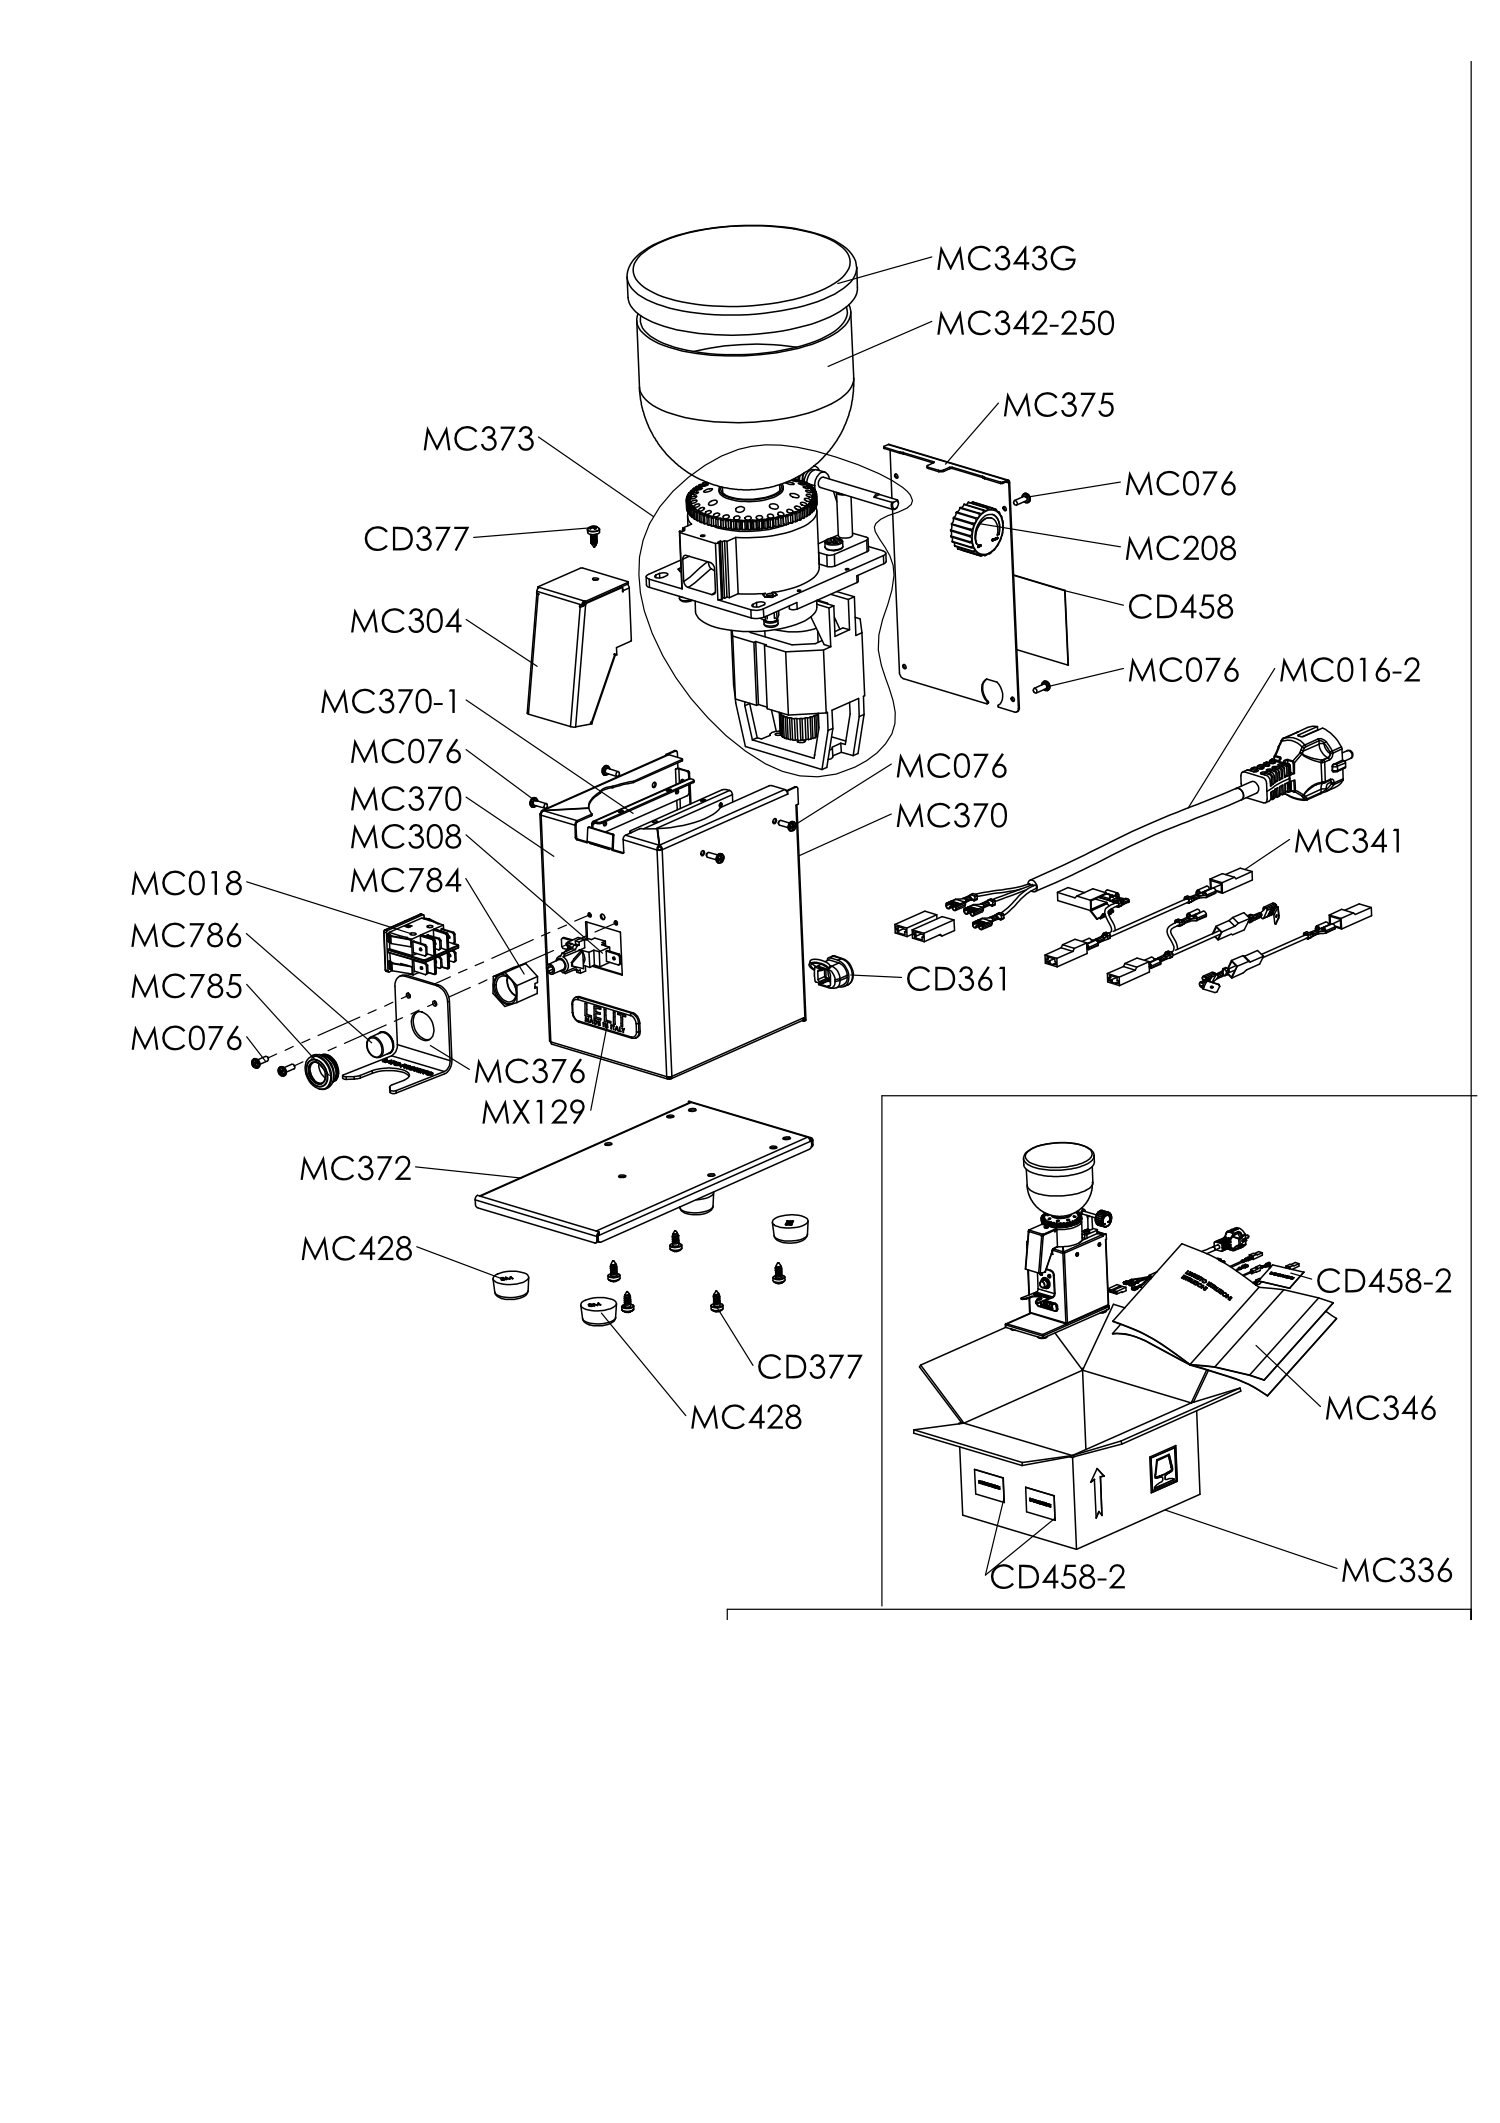 Exploded Views Lelit Exploded Views Pl Mmi Exploded View Complete | My ...